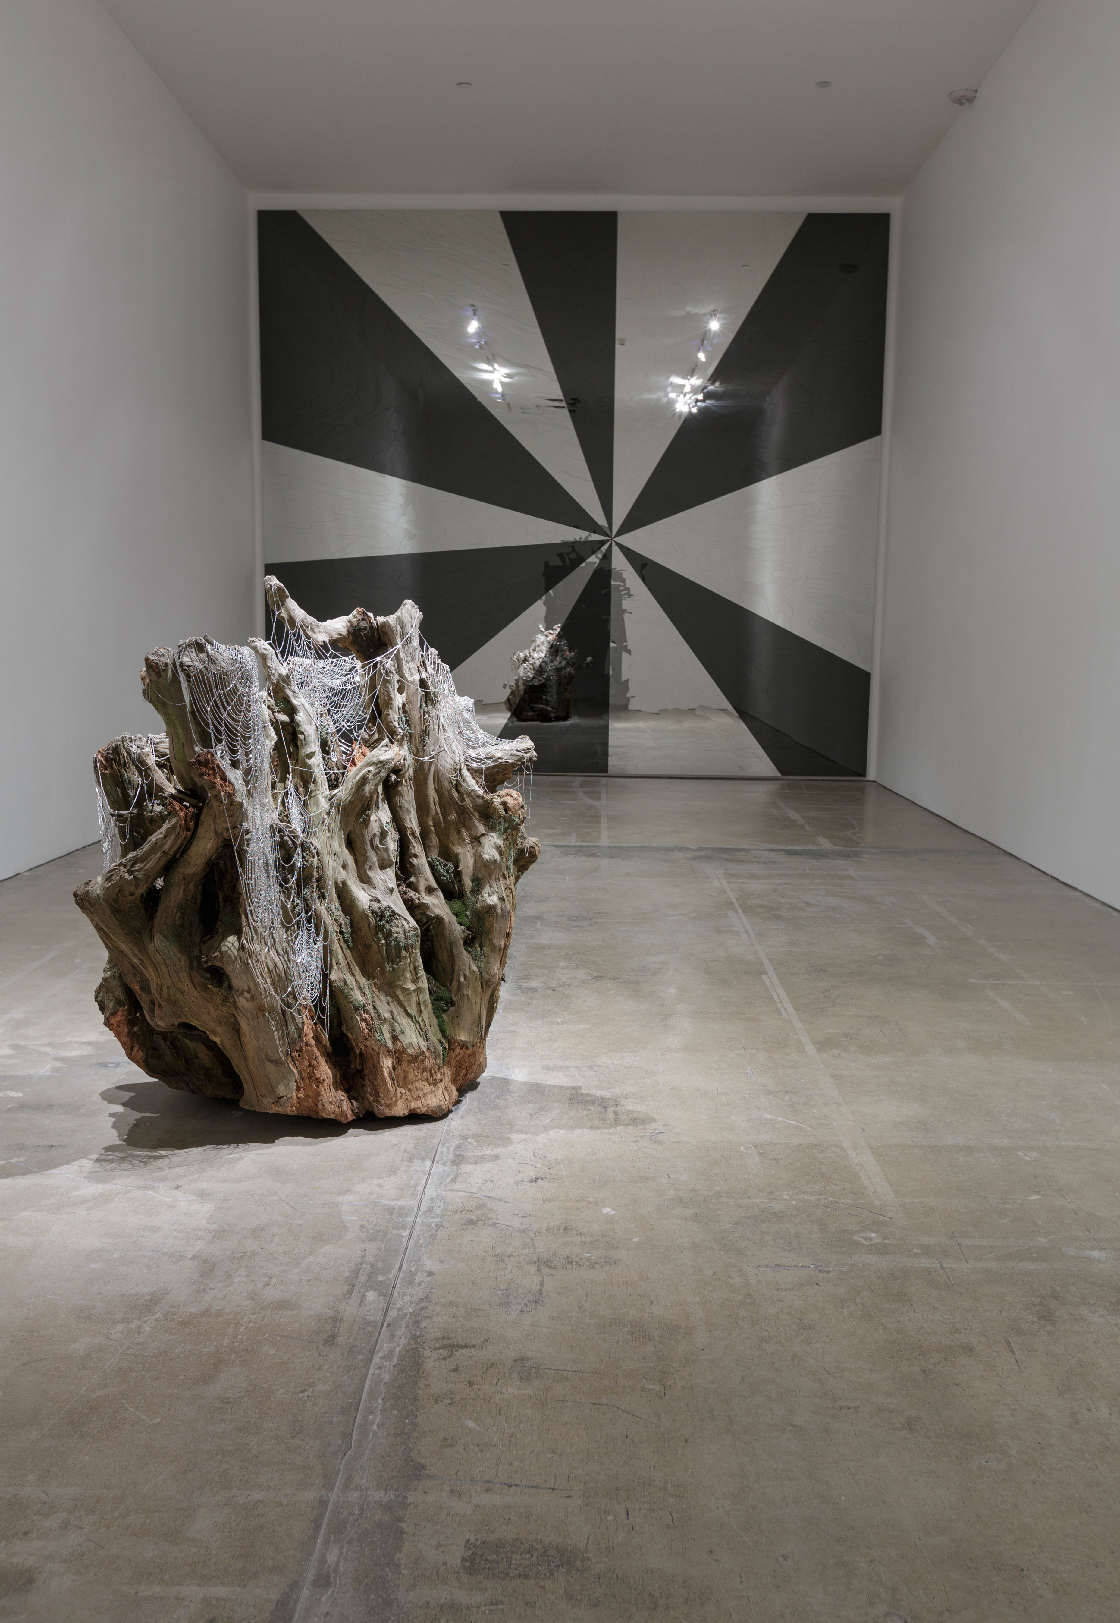 In the foreground: Holding Still, 2015. White brass, tree root, plant material, dirt and steel, by Jim Hodges